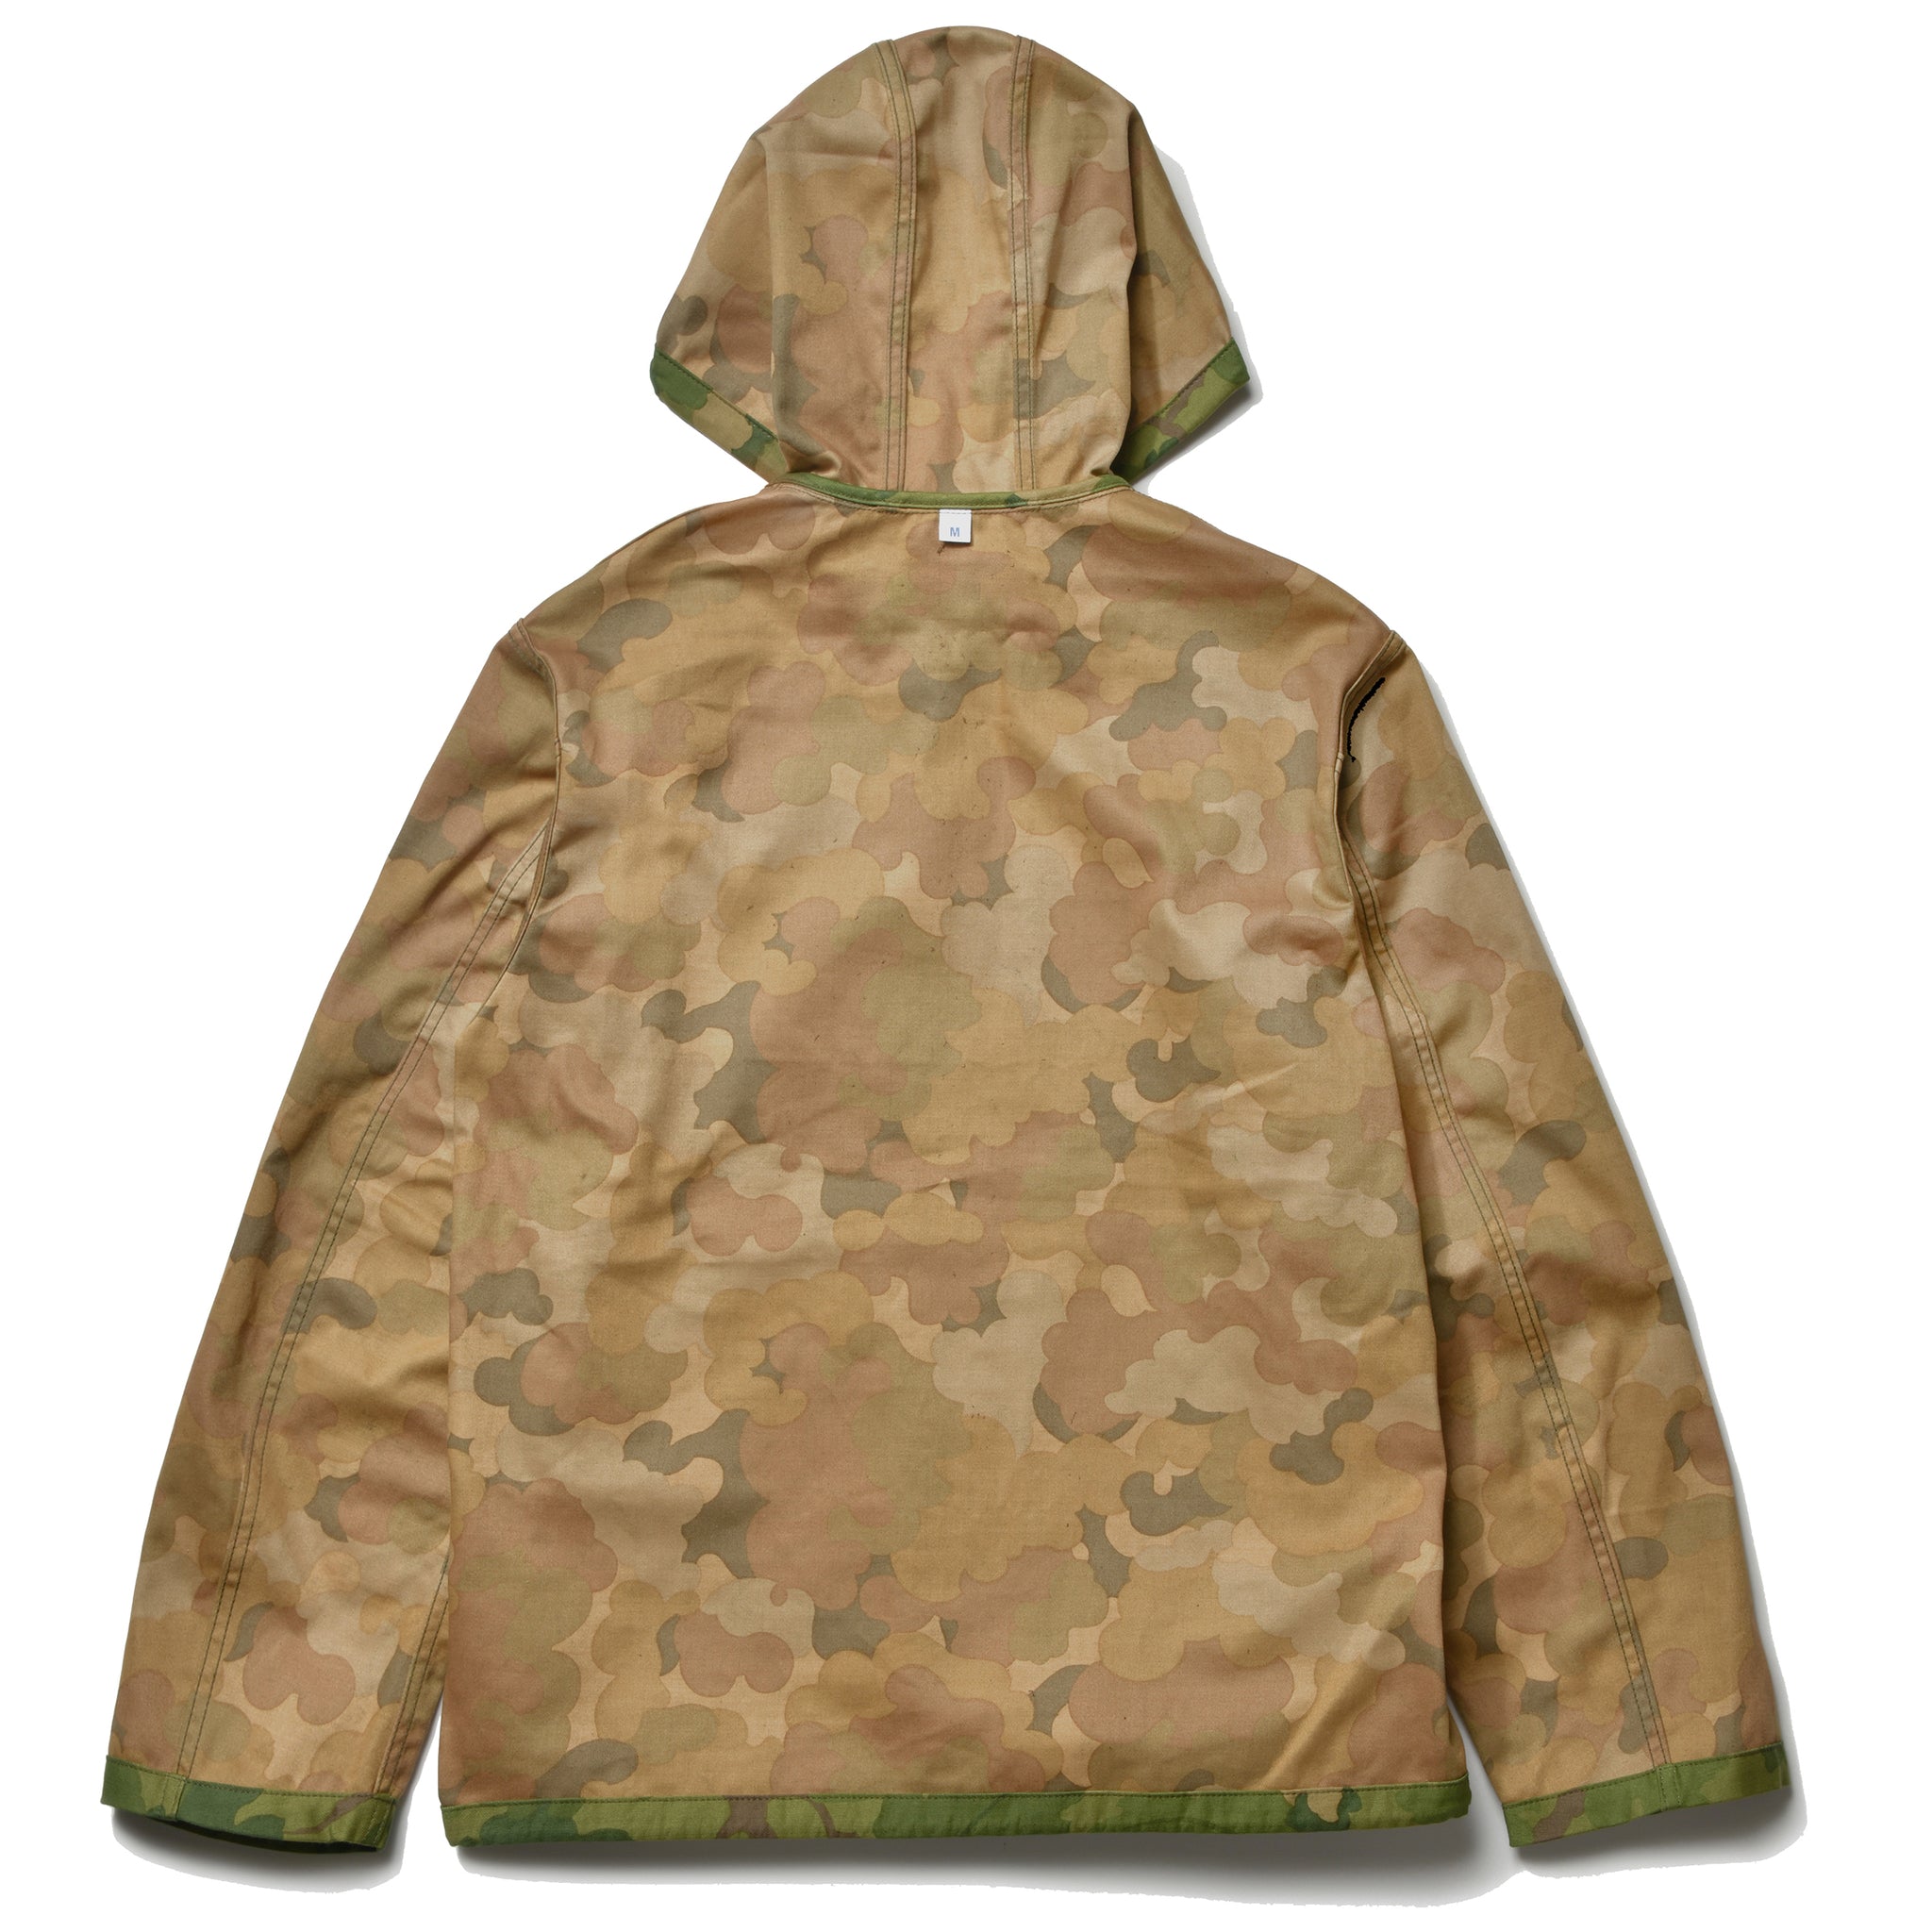 CAMOUFLAGE PARKA / MITCHELL PATTERN – The Real McCoy's